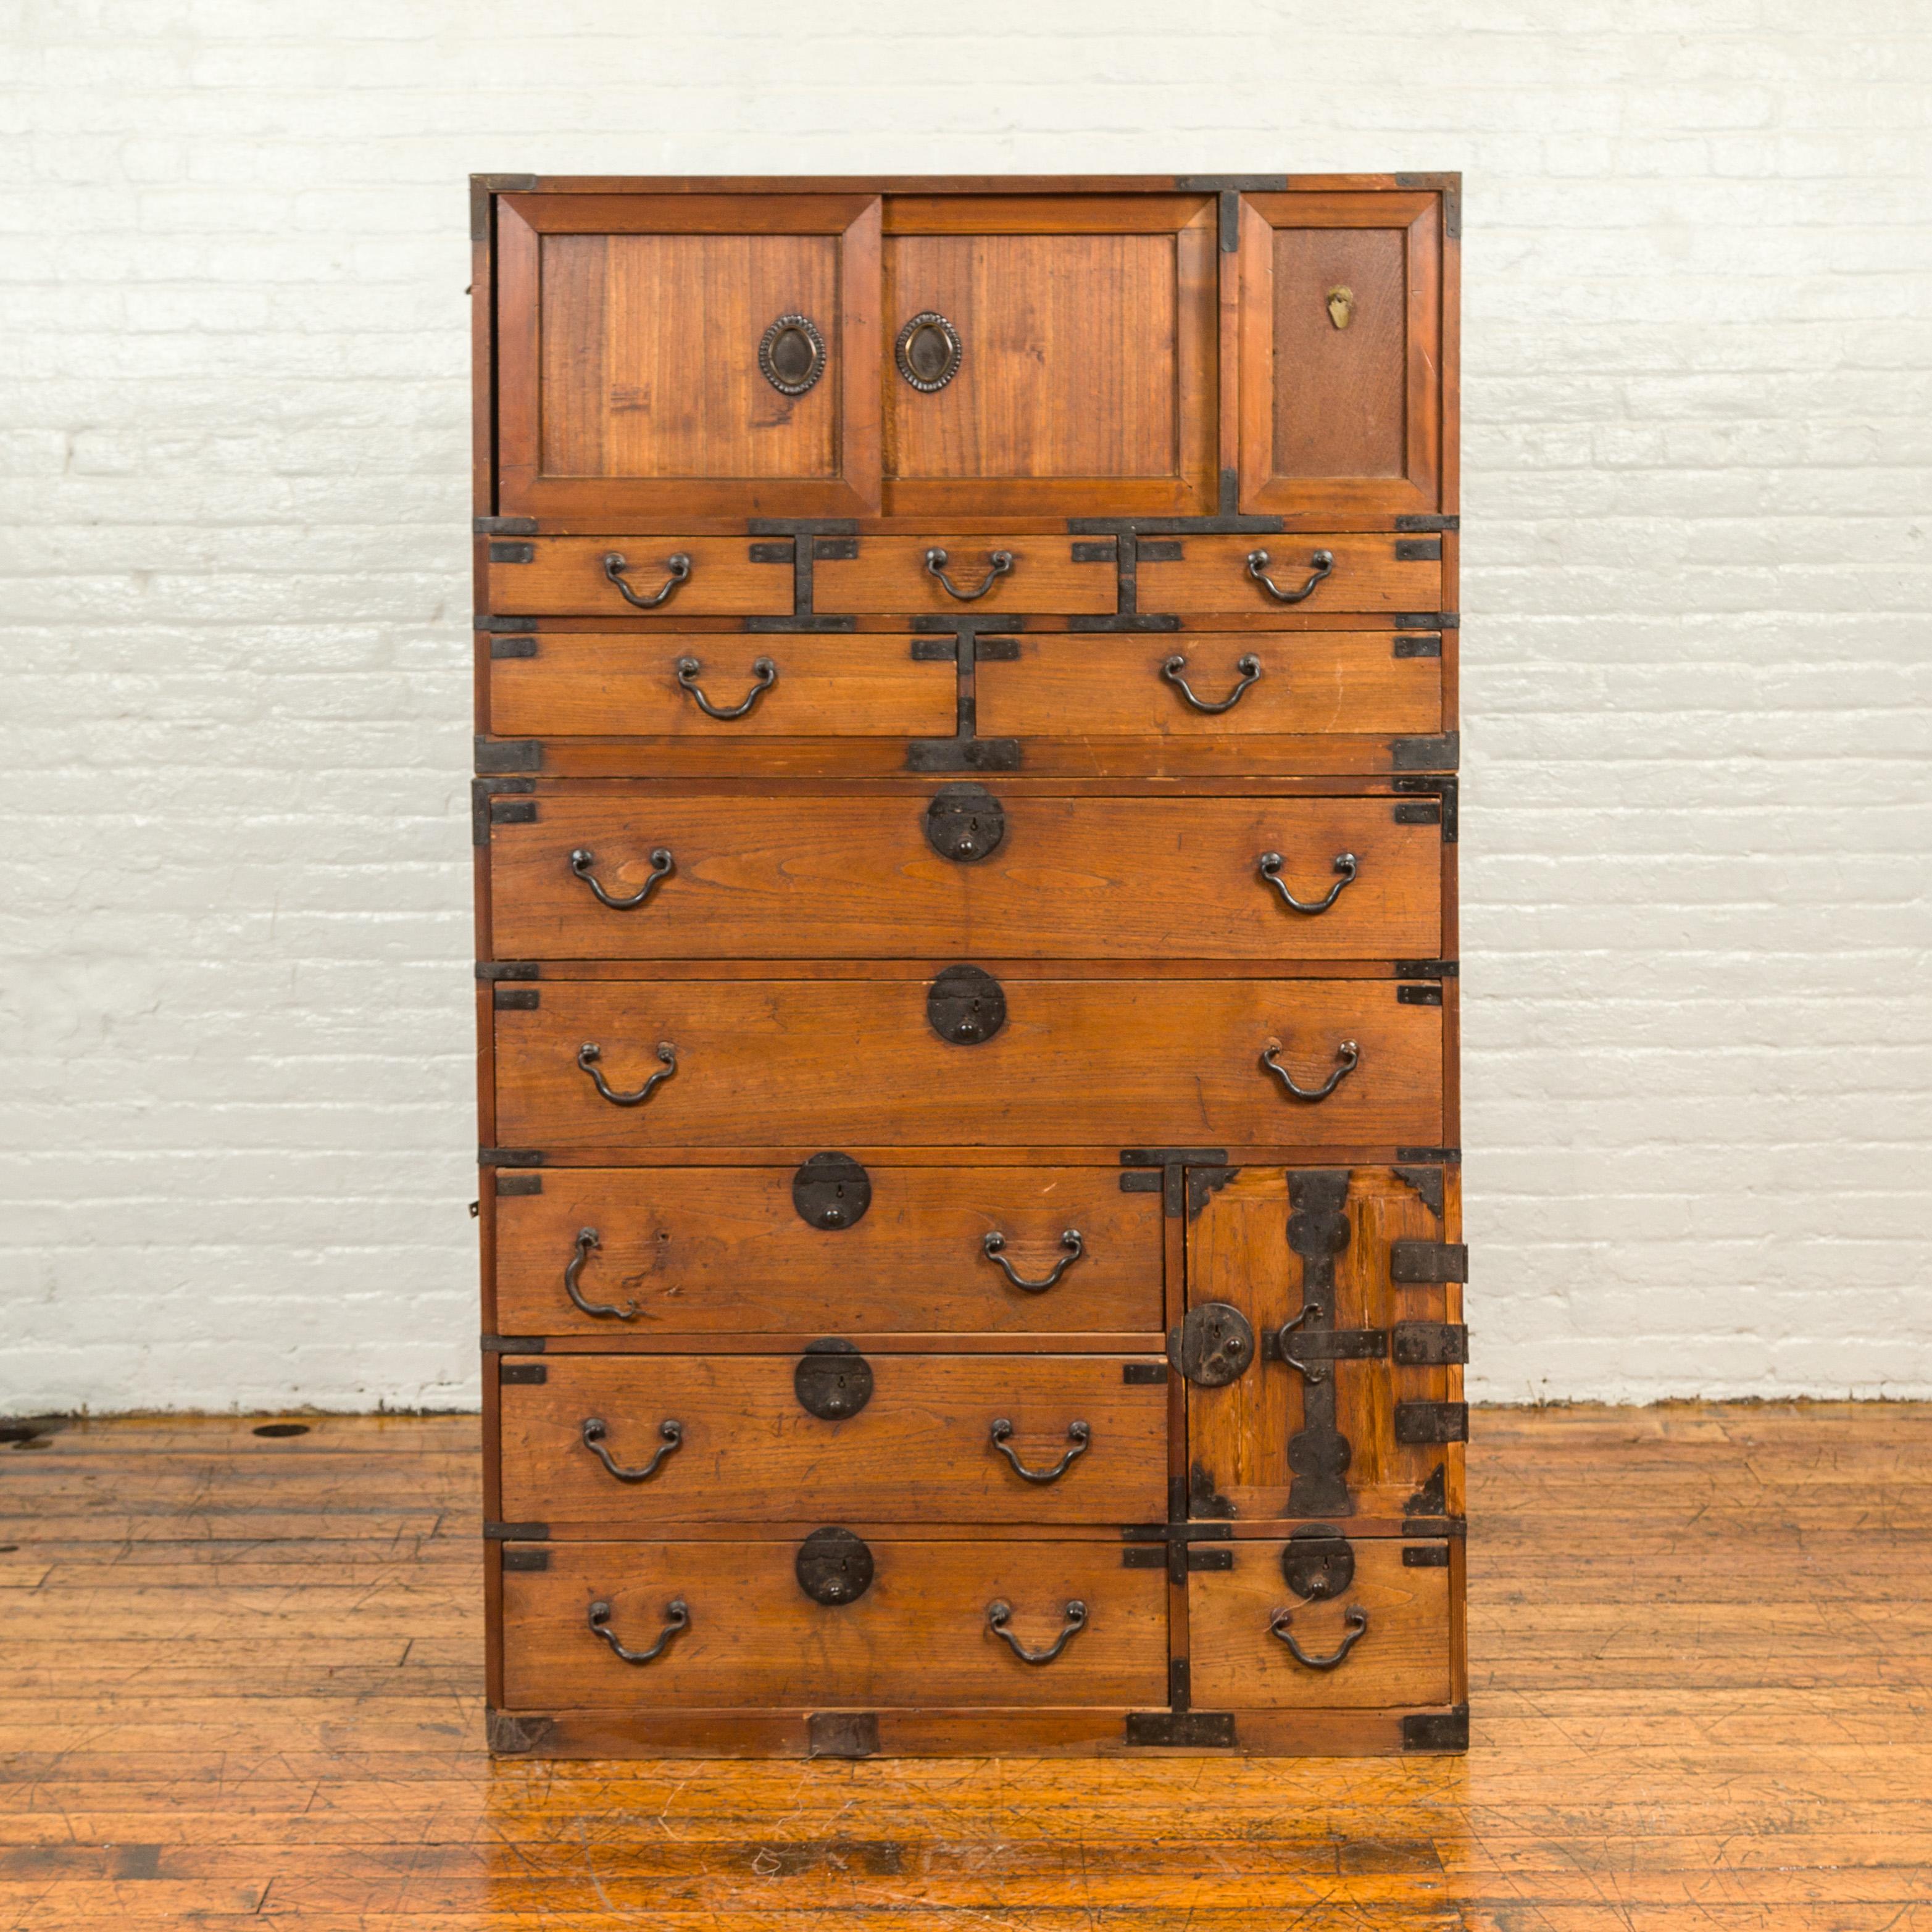 A tall Japanese Meiji period tansu chest from the late 19th century, with drawers and sliding panels. Born in Japan during the second half of the 19th century, this two-section tall tansu chest features two sliding panels and a removable one in its